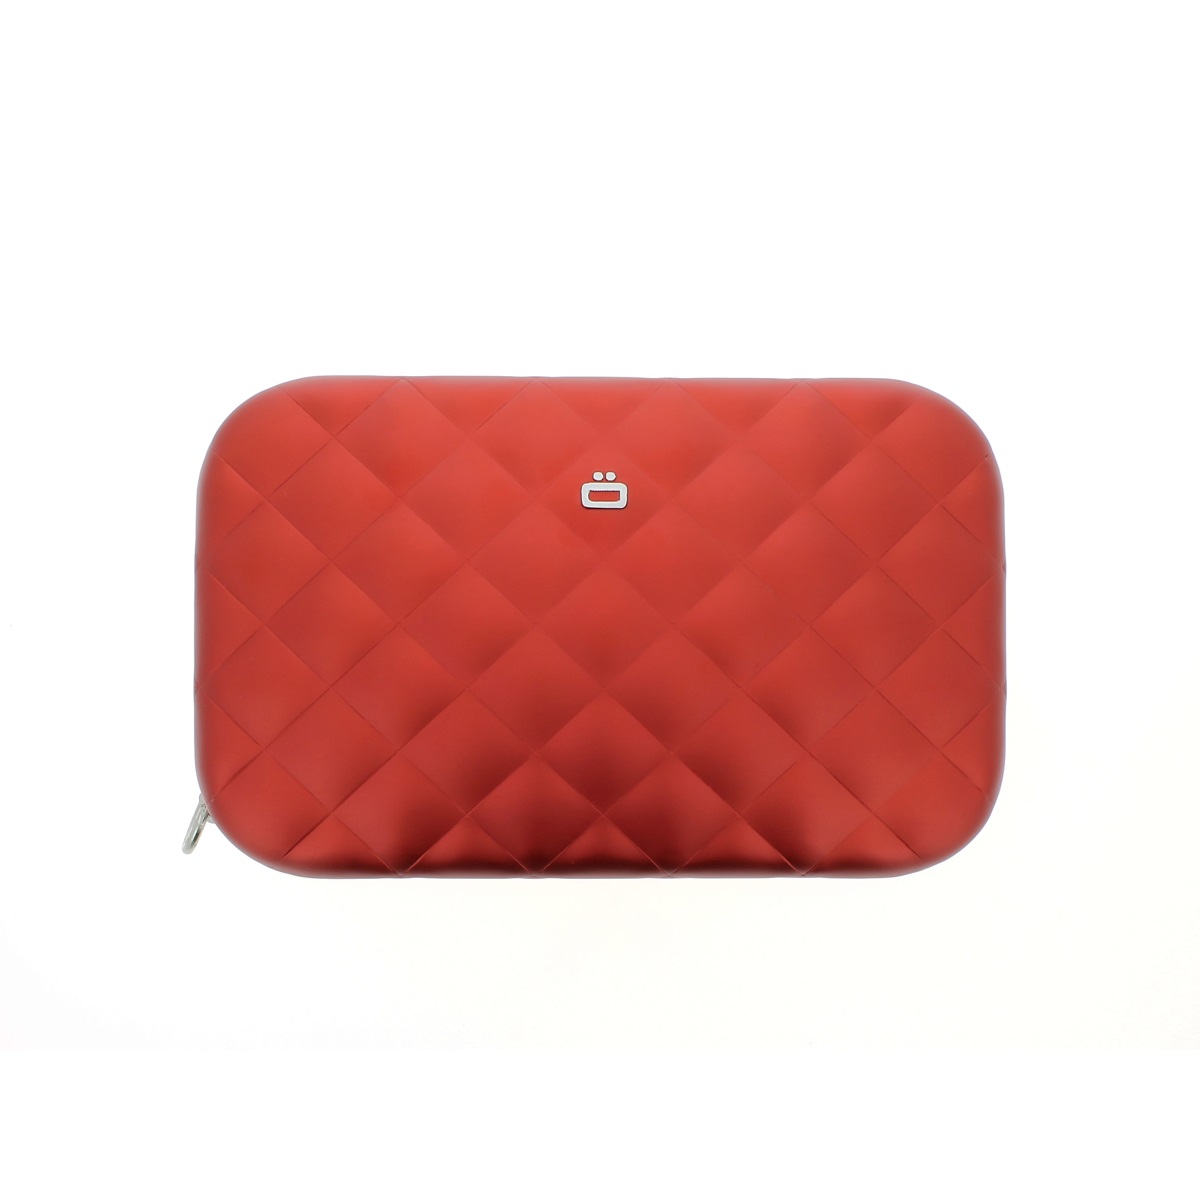 OGON Aluminum Clutch Quilted Lady Bag - Red